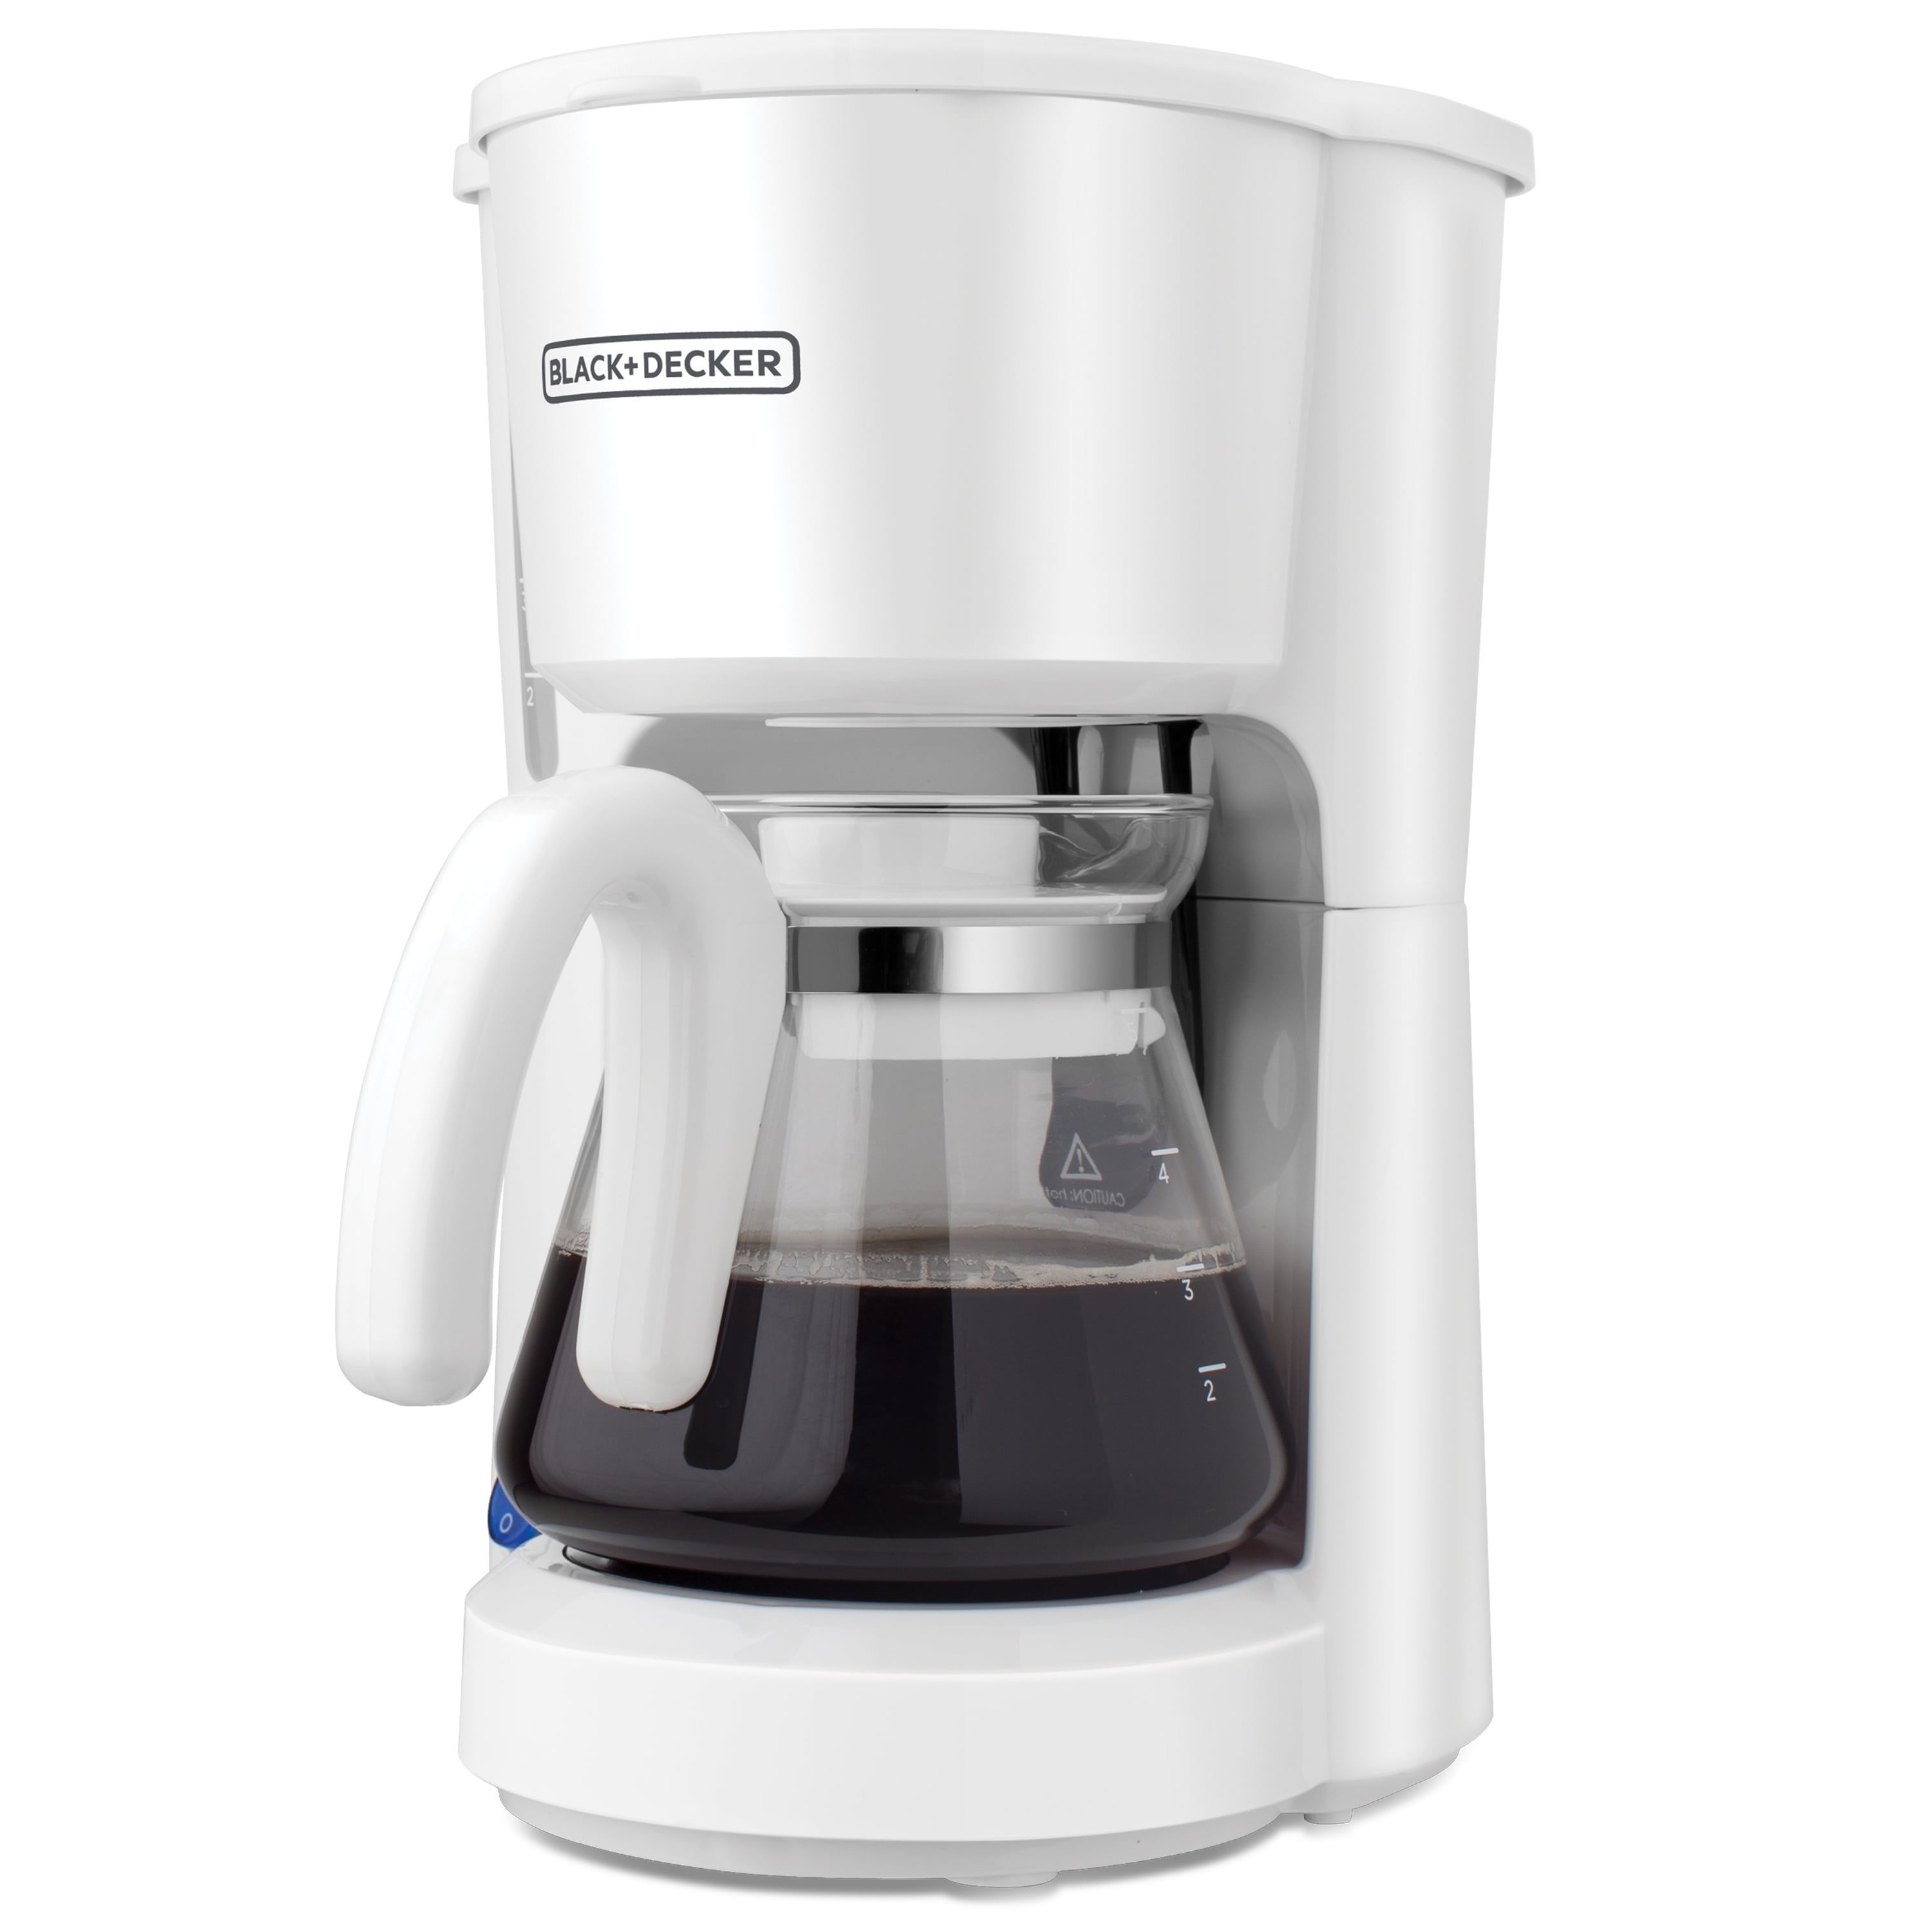 black & decker replacement 5 cup glass carafe w/lid cm0750 coffee maker